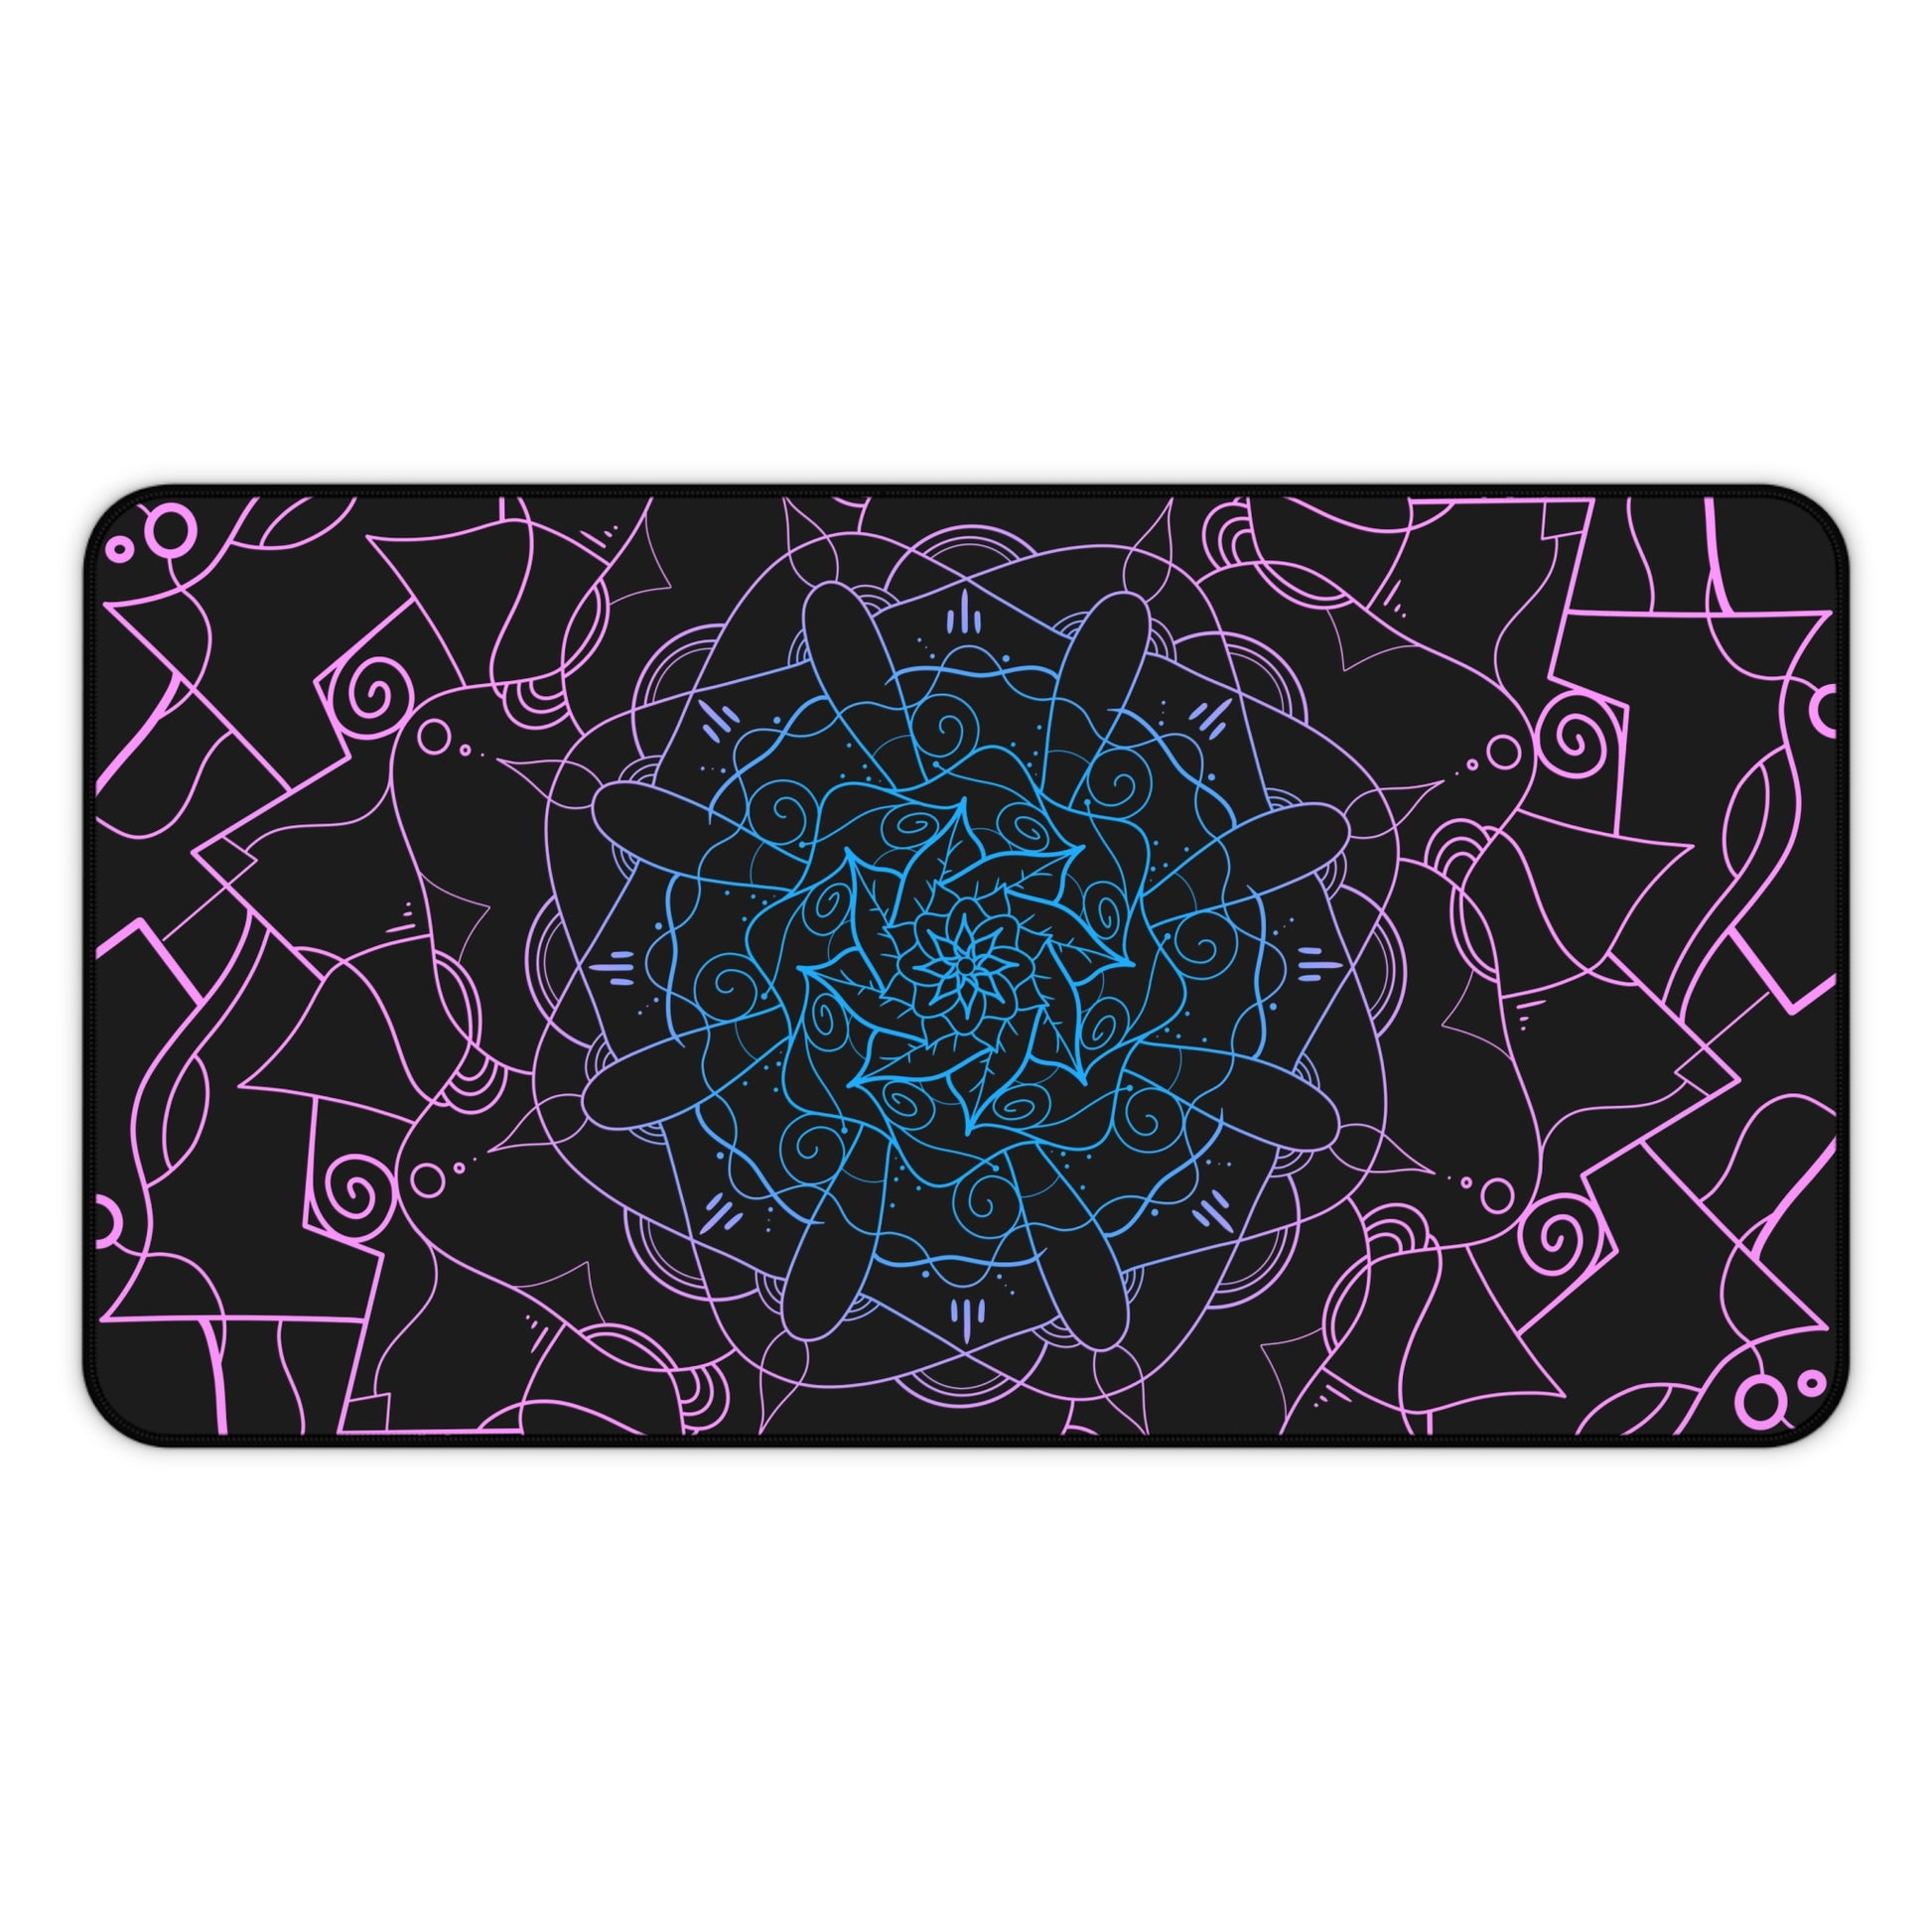 A 12" x 22" desk mat with a pink and blue mandala pattern on a black background.